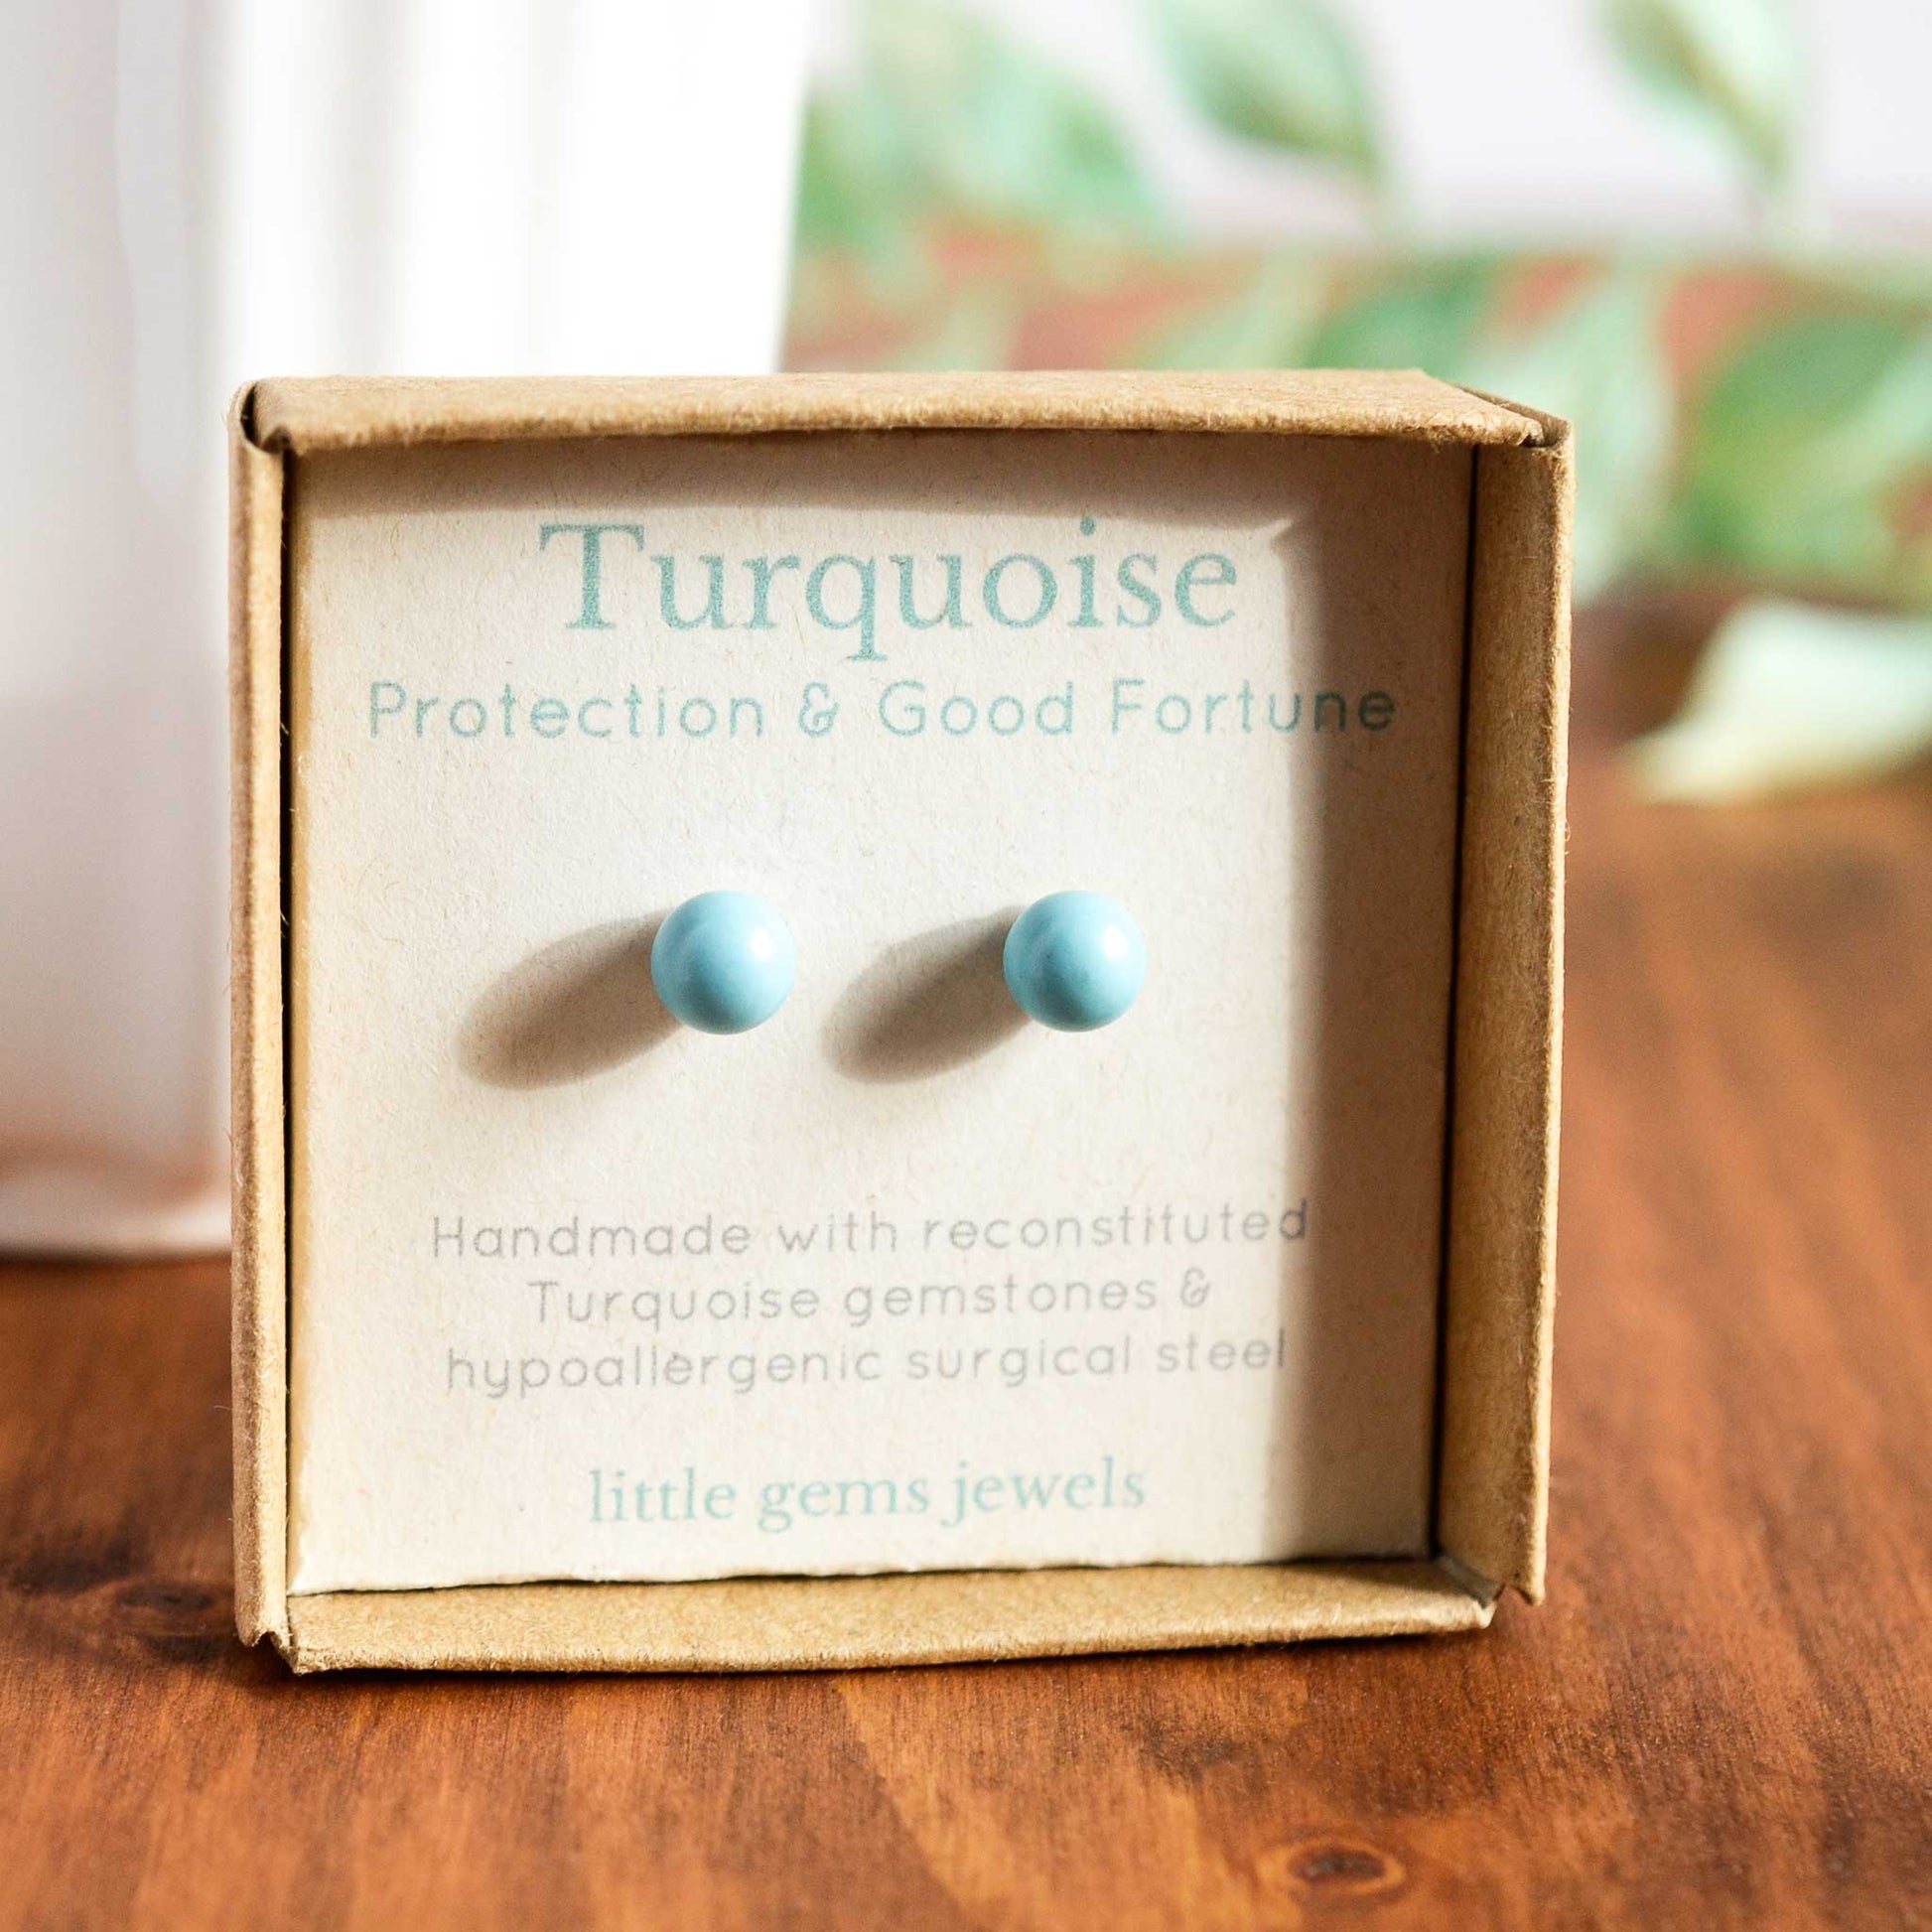 Turquoise ball stud earrings in gift box